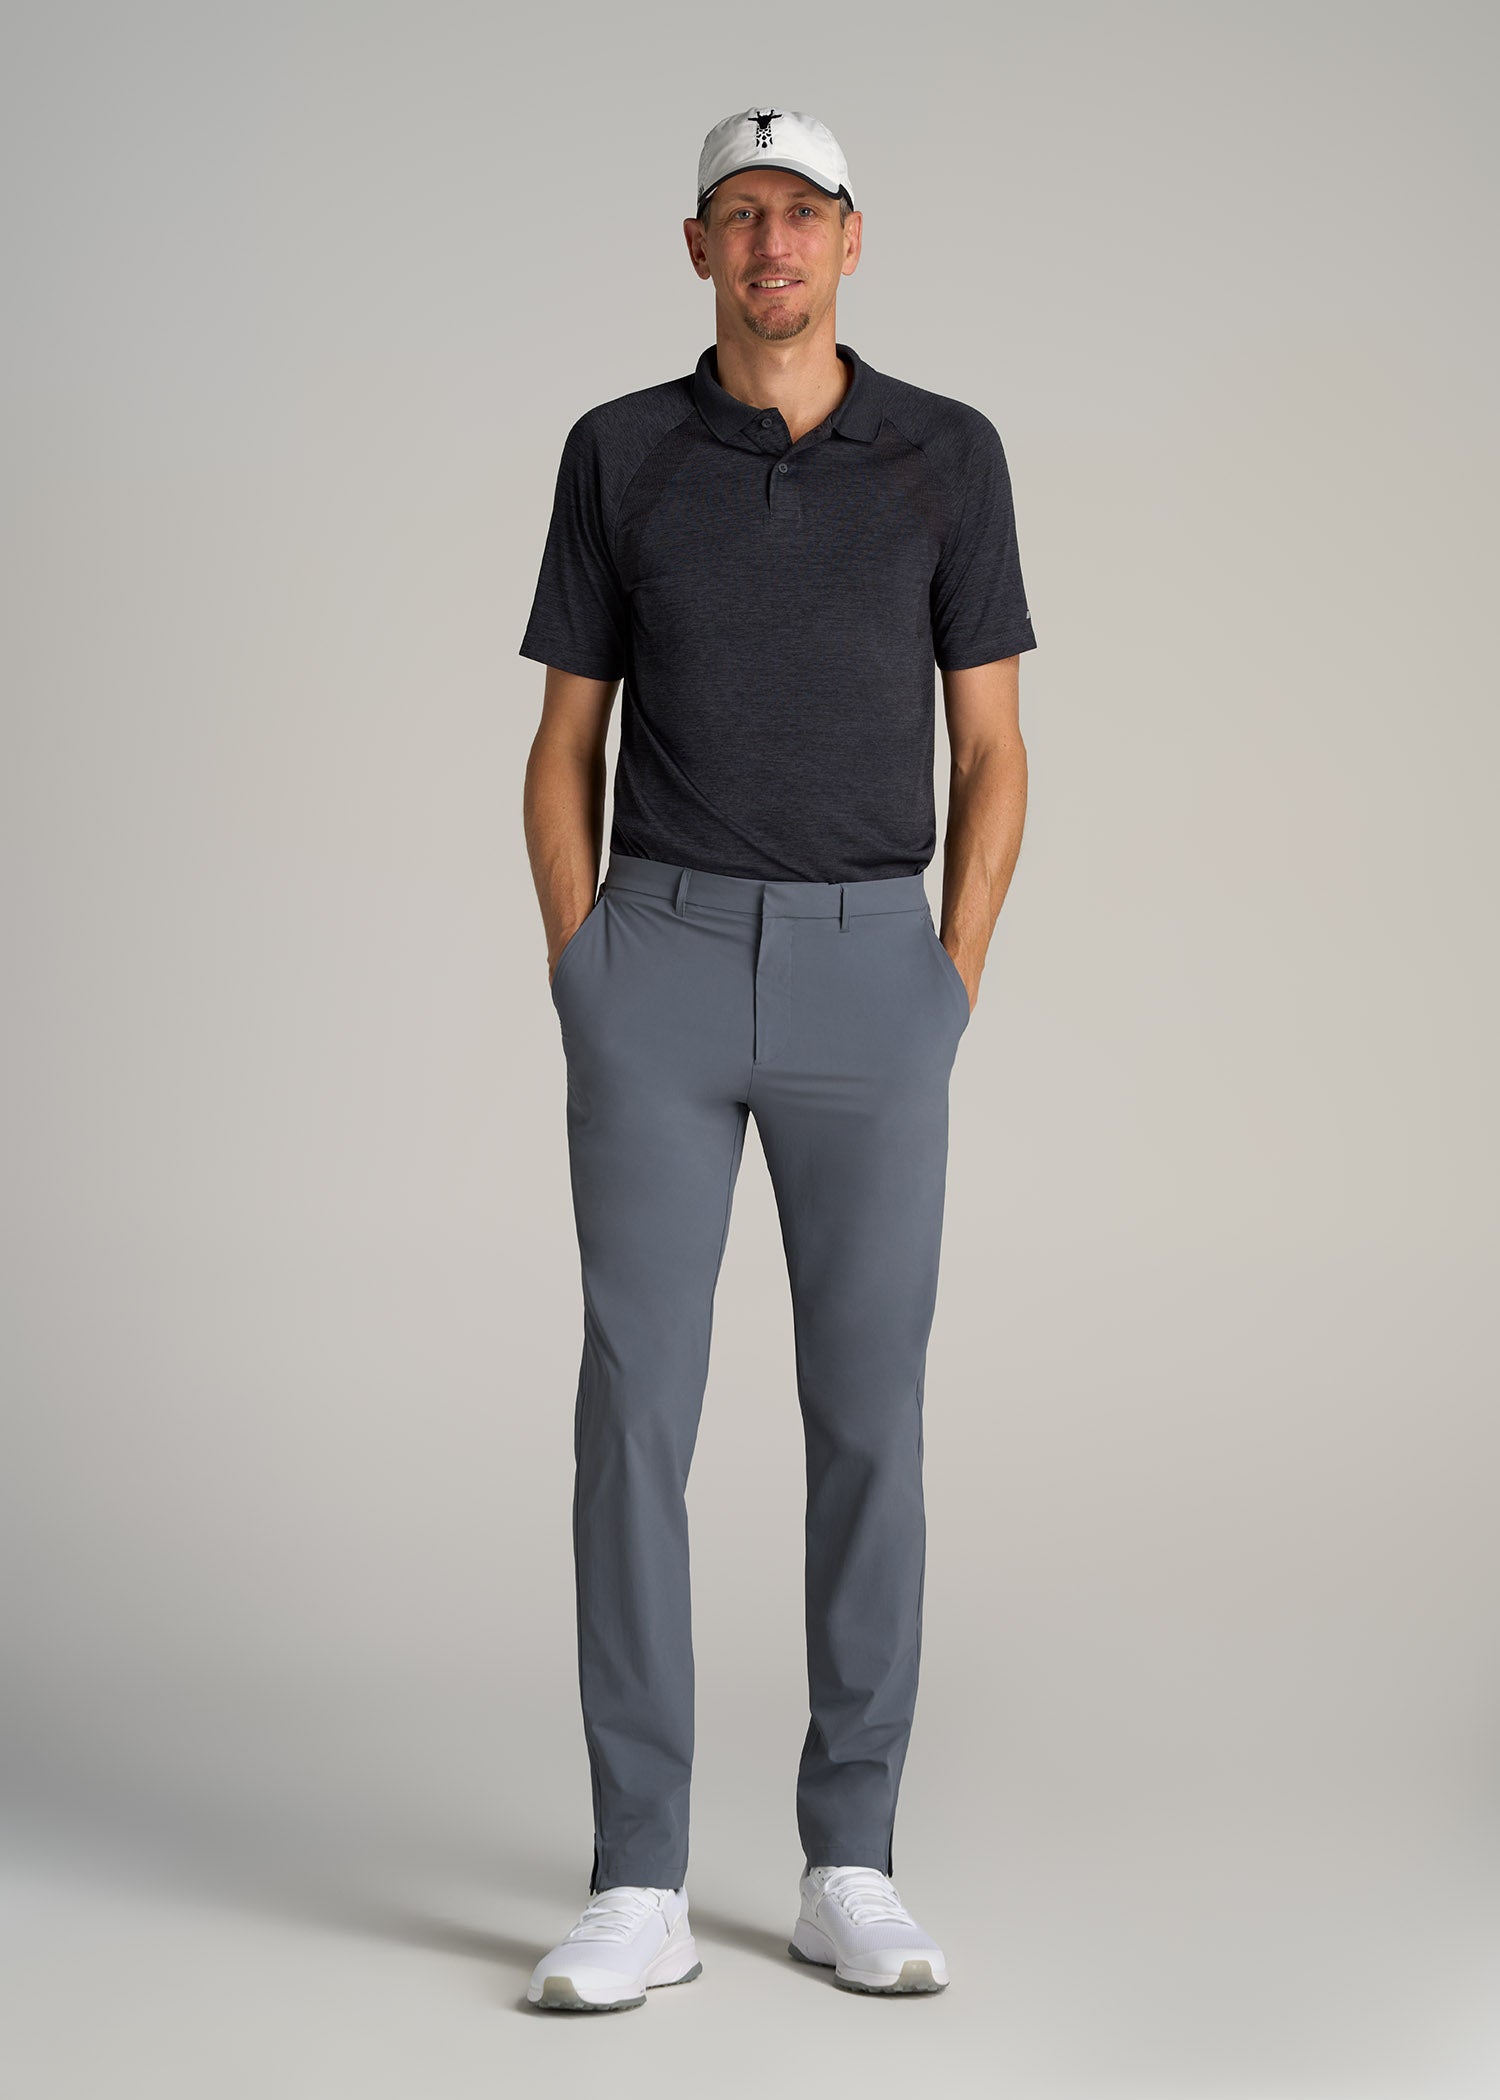 Men's Tall Performance Casual Pants Smoky Blue | American Tall